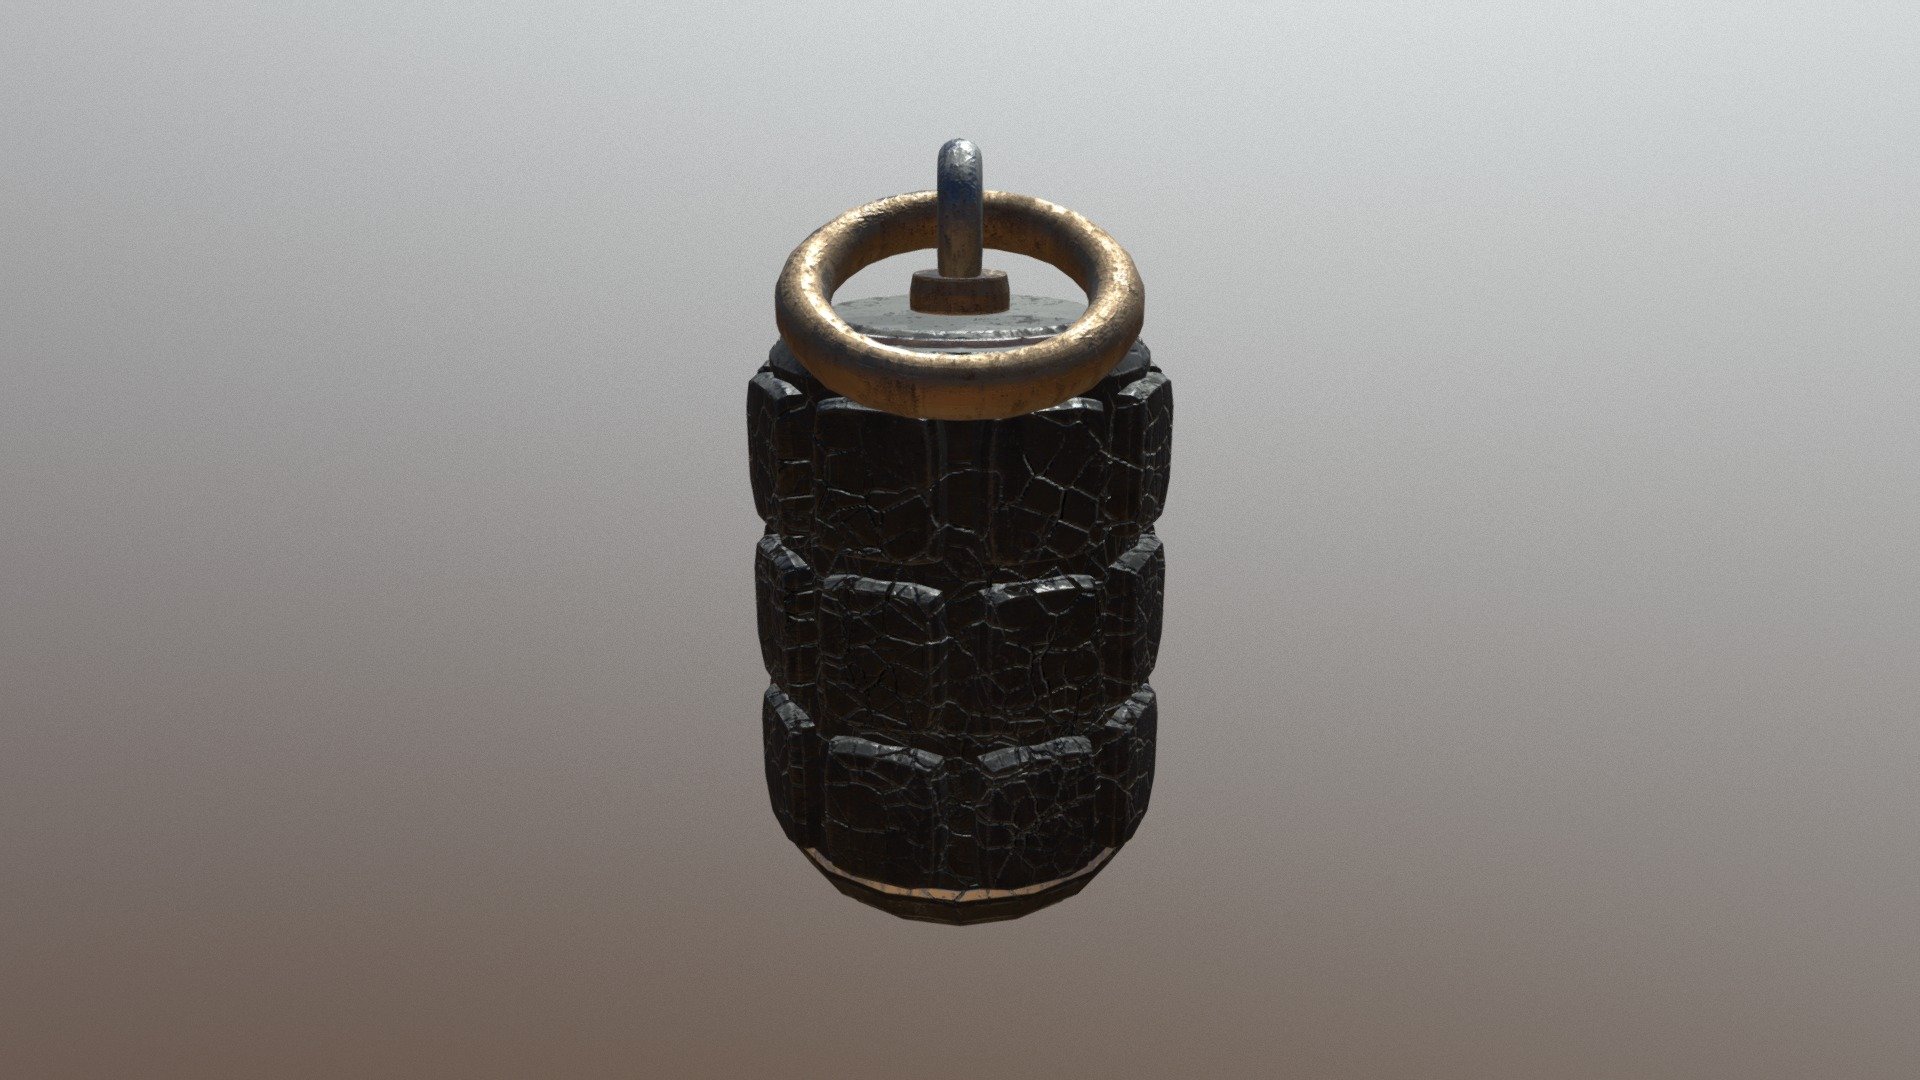 Fragmentation Grenades for Chaos Renegades

Made for There is Only War Mod for ARMA III

Link: https://steamcommunity.com/sharedfiles/filedetails/?id=1160452826 - Warhammer 40,000 - Frag Grenades (Chaos) - 3D model by kommissarazura 3d model